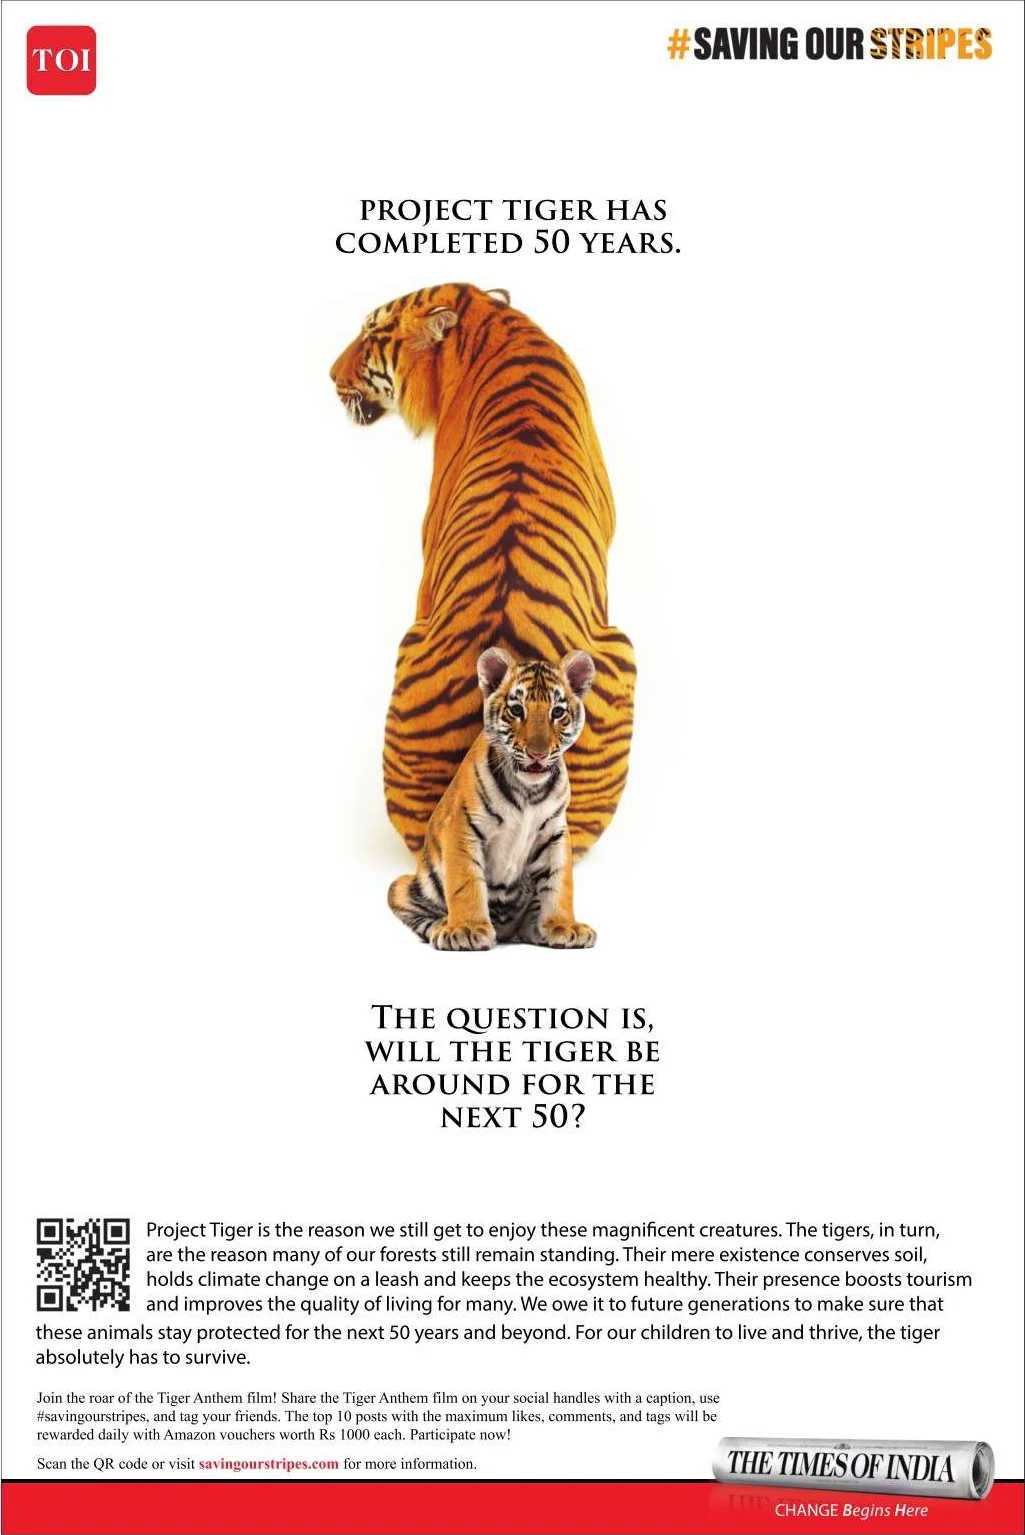 TOI Protect Tiger Initiative - Ad Design Review